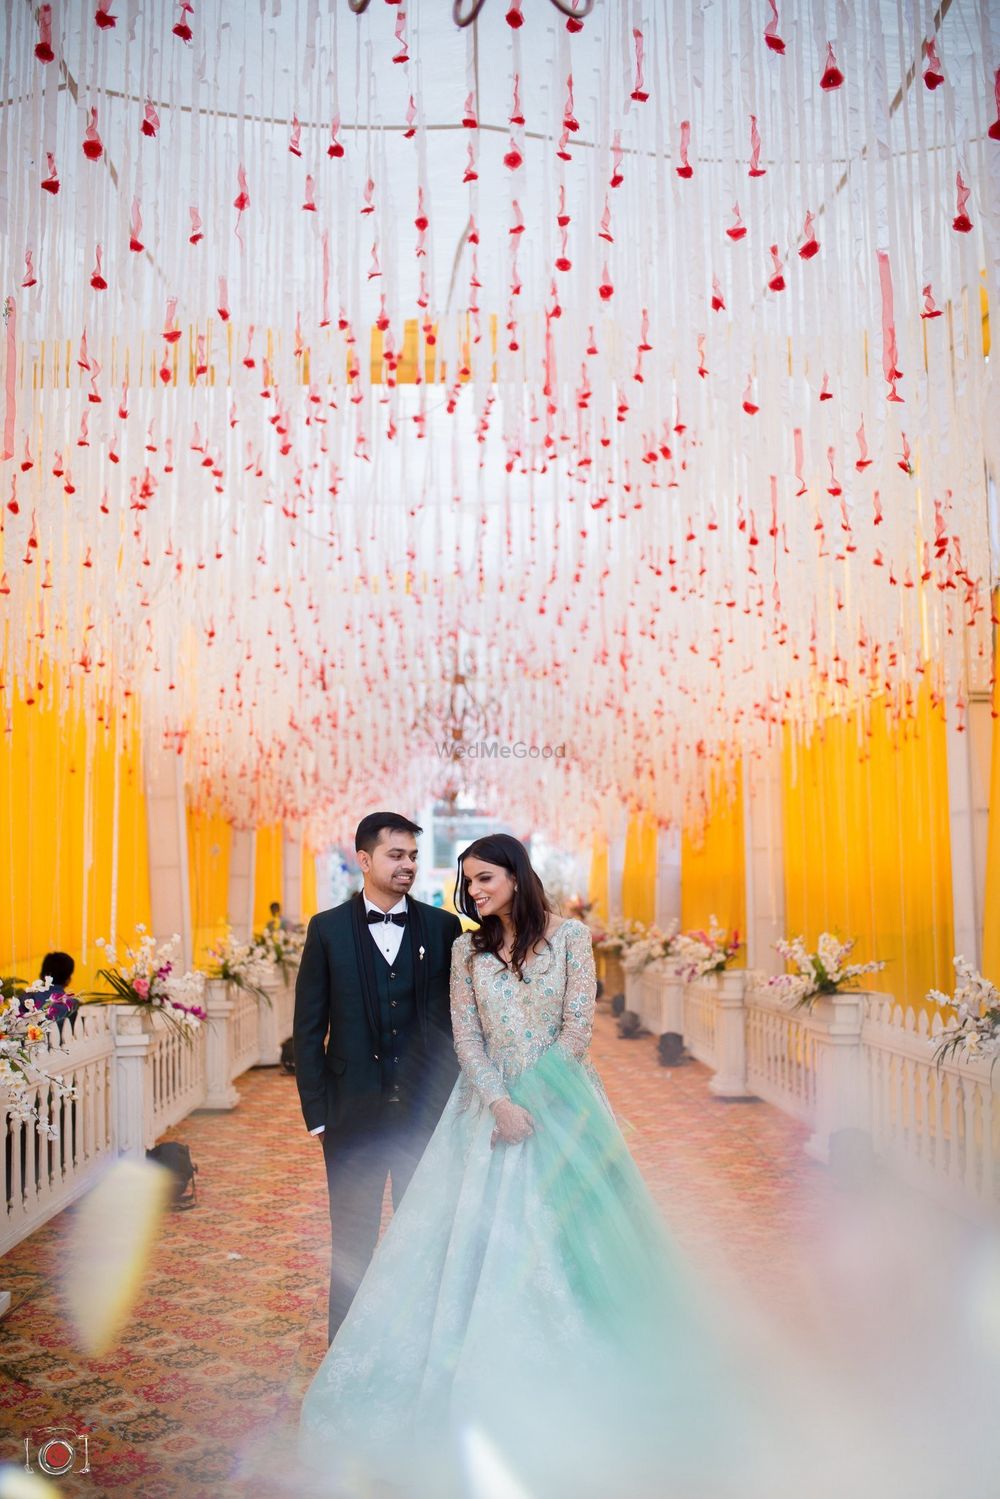 Photo of Engagement or sangeet couple shot with floral string decor